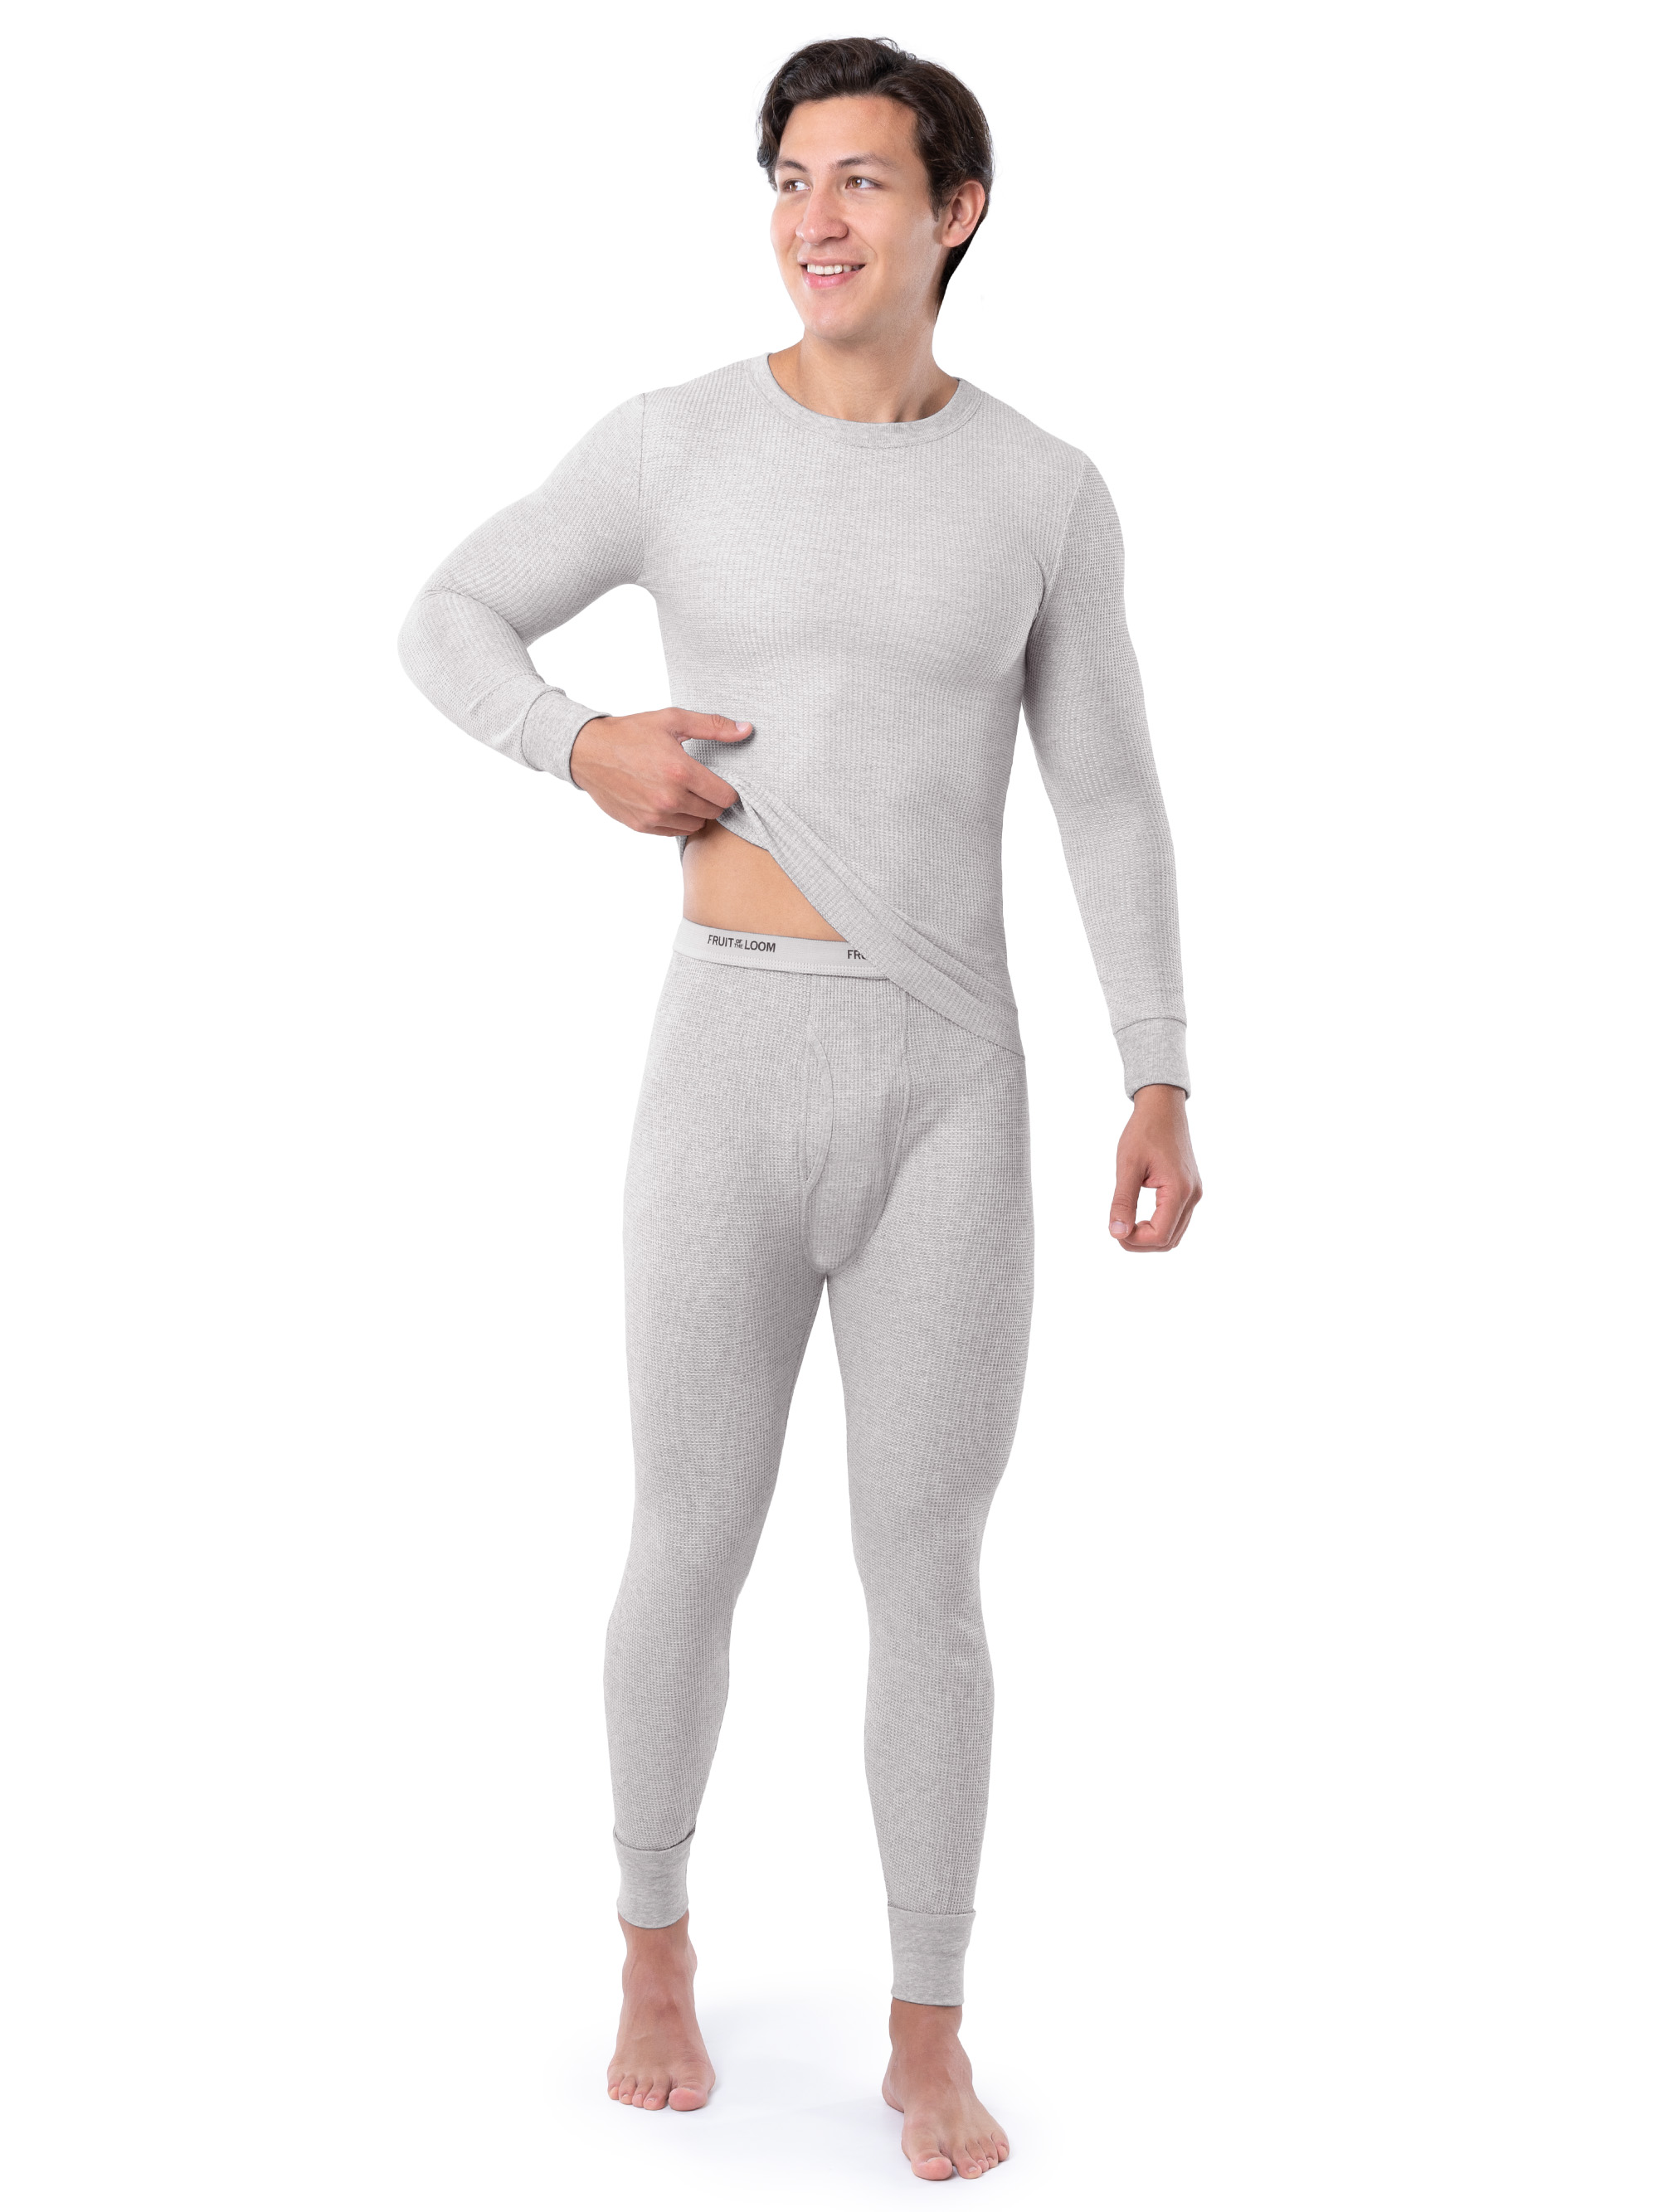 Fruit of the Loom Men's Thermal Waffle Baselayer Underwear Pant - image 2 of 8